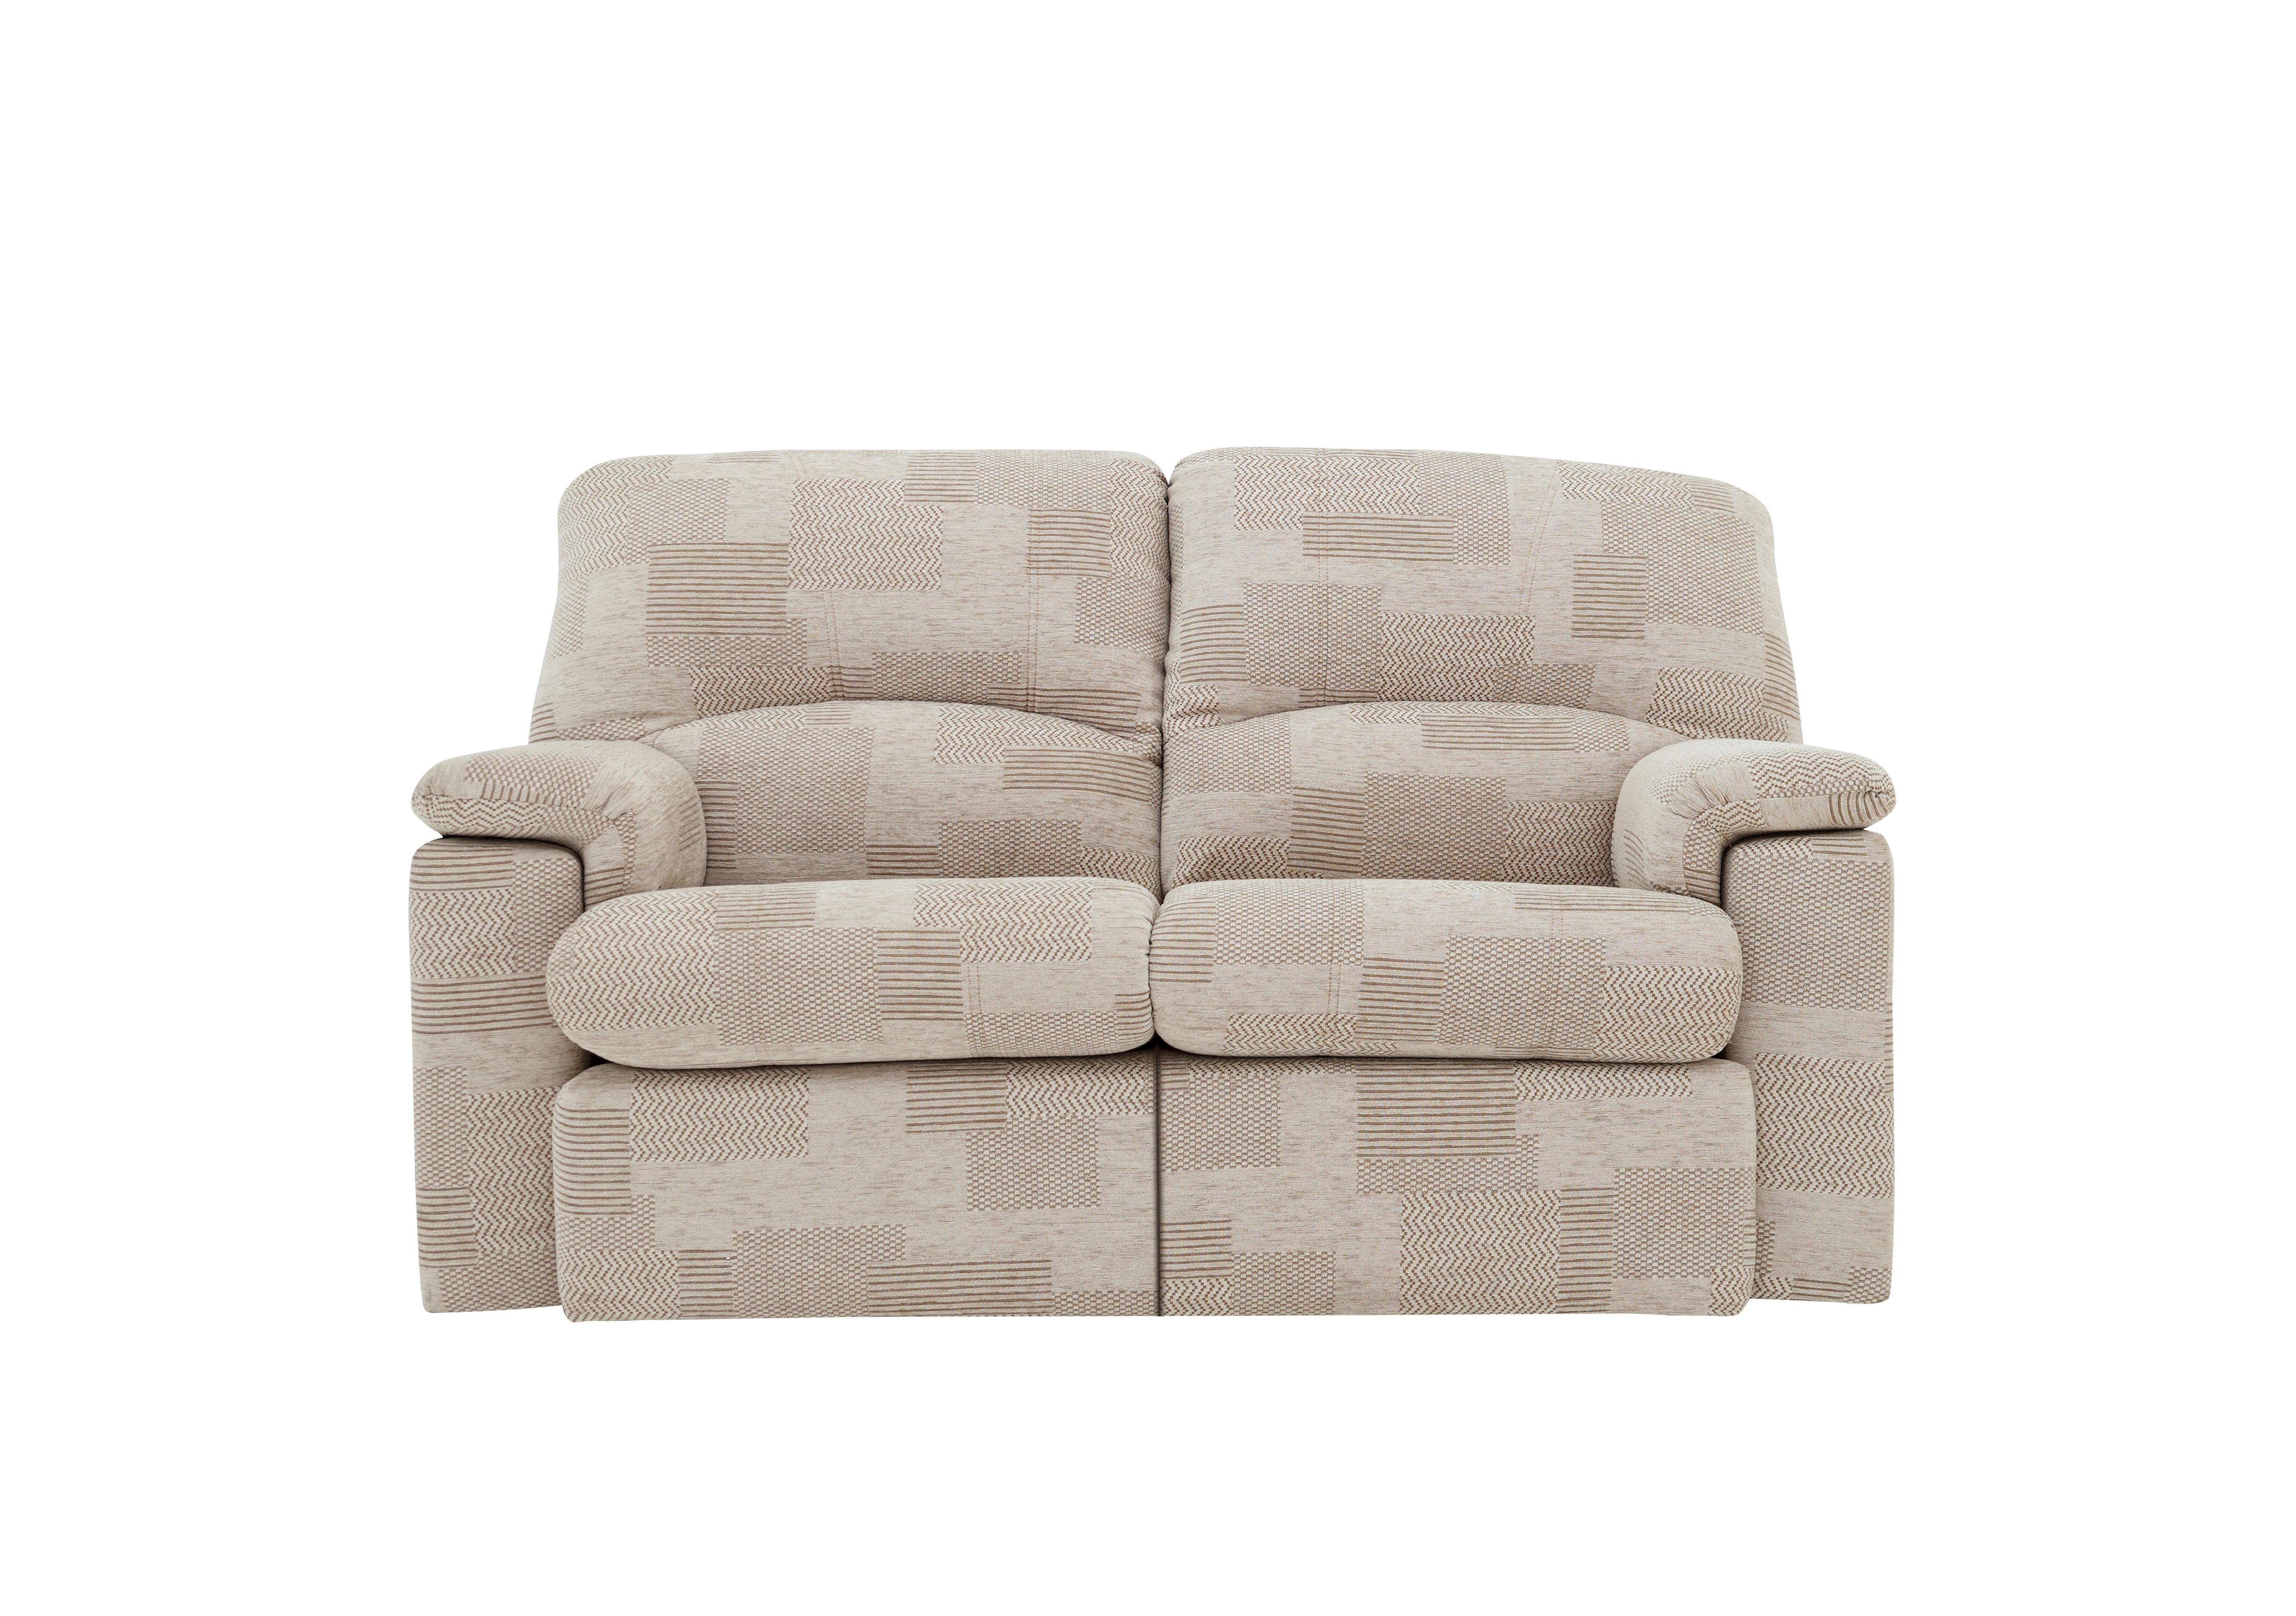 Chloe 2 Seater Fabric Sofa in C008 Checkers Putty on Furniture Village